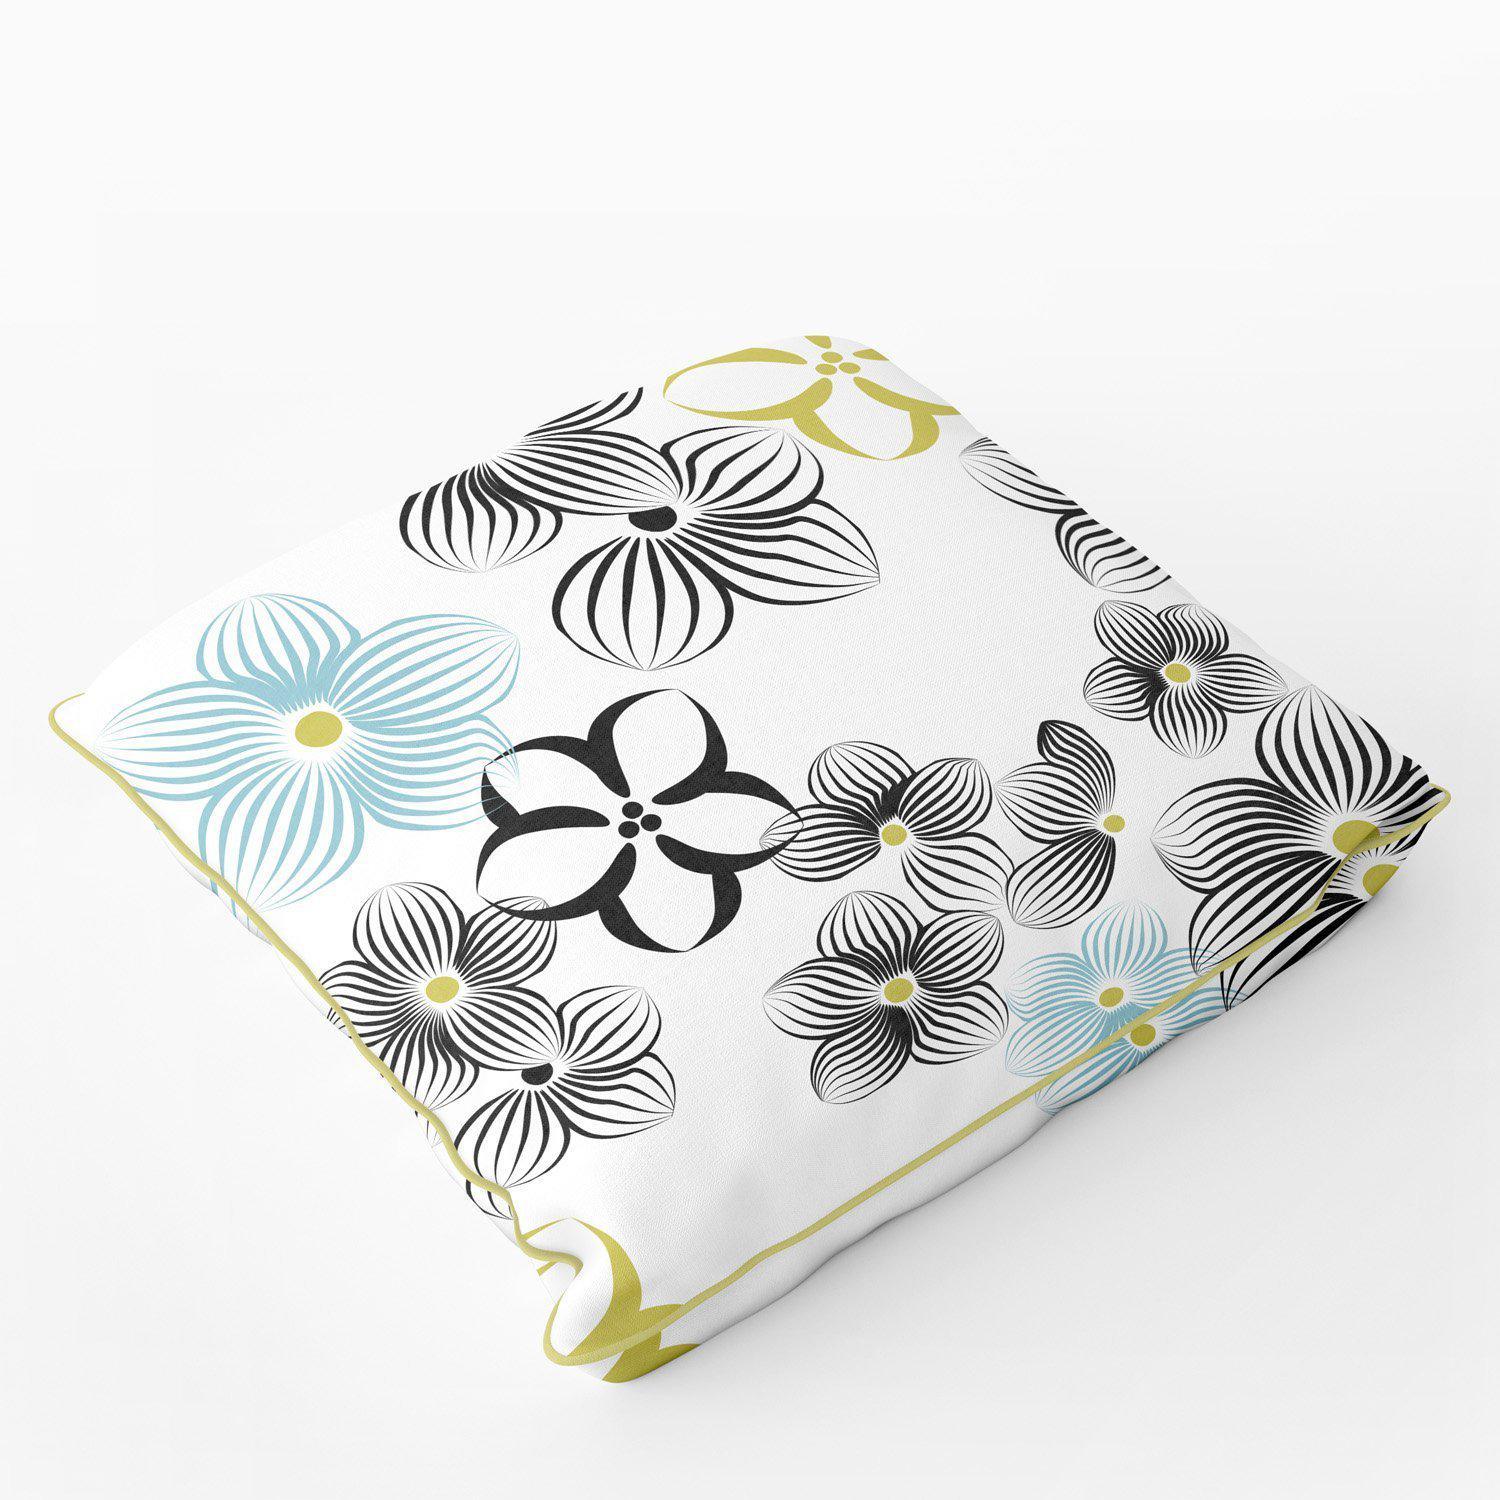 Floral Impression (White) - Funky Art Cushion - Perfect Day - House Of Turnowsky Pillows - Handmade Cushions UK - WeLoveCushions